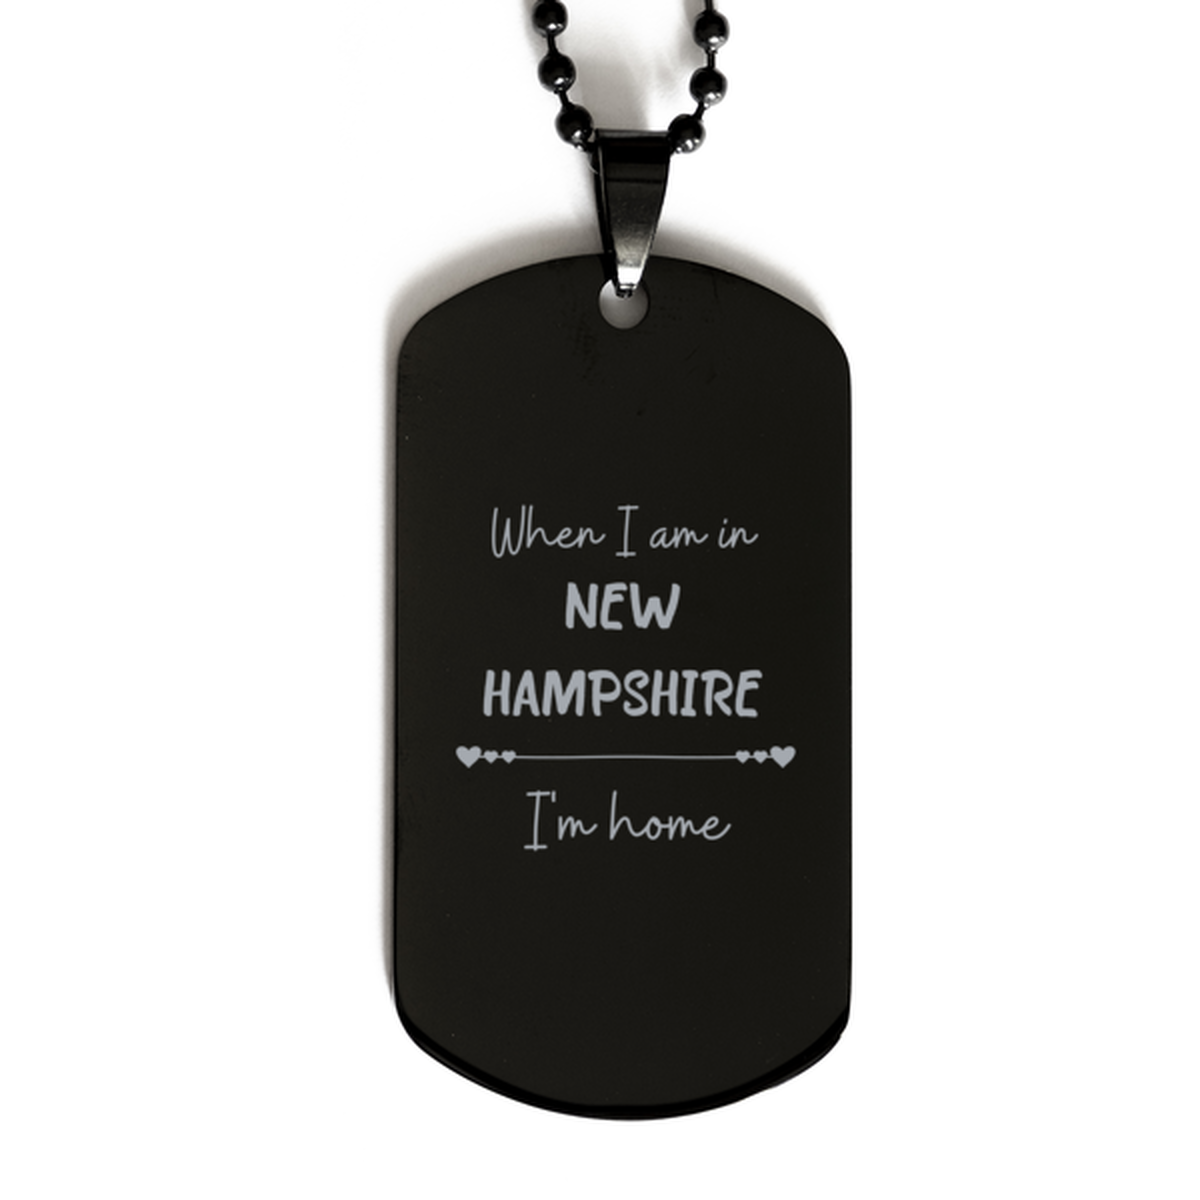 When I am in New Hampshire I'm home Black Dog Tag, Cheap Gifts For New Hampshire, State New Hampshire Birthday Gifts for Friends Coworker